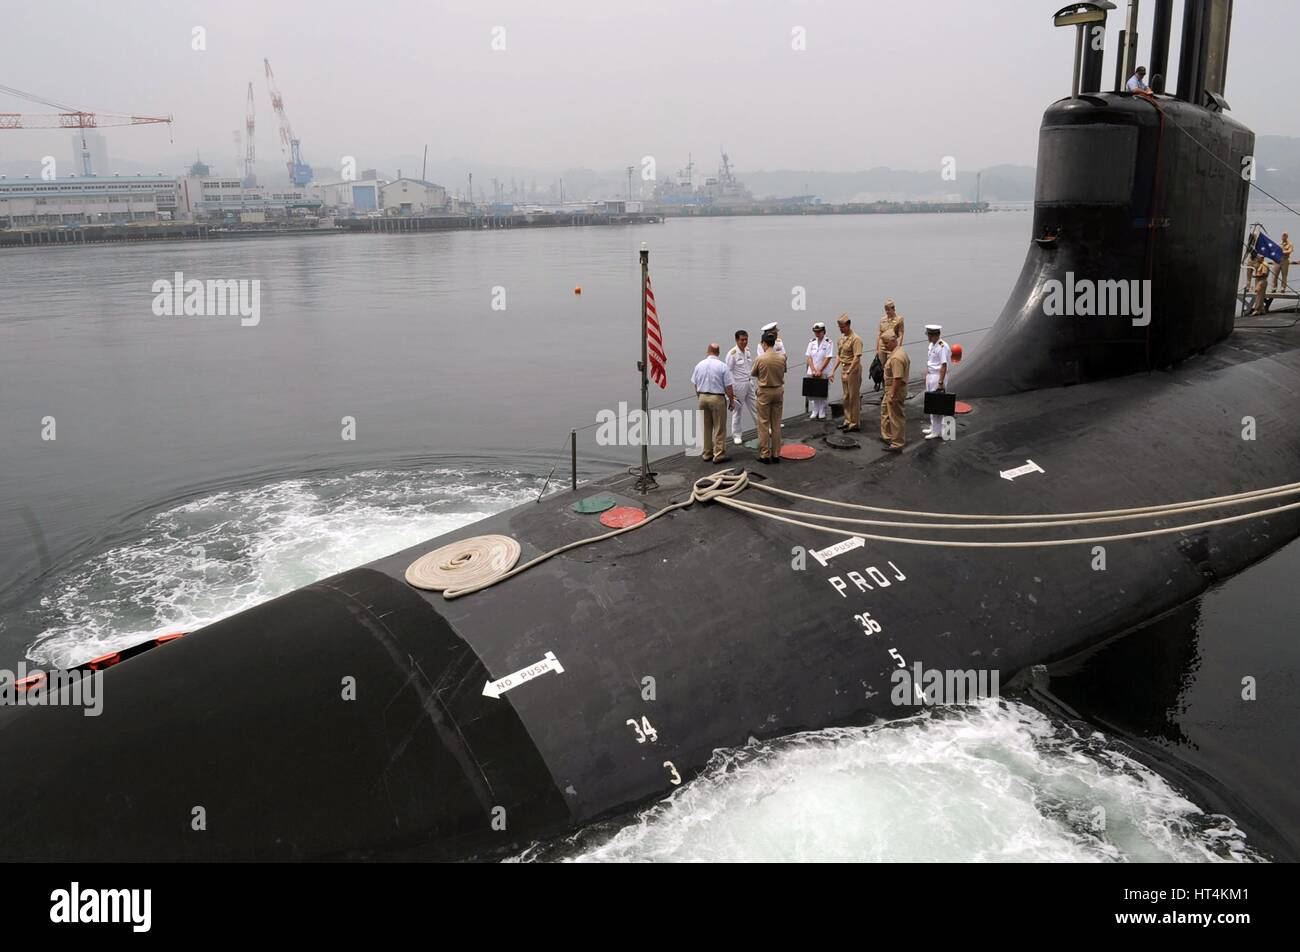 U.S. and Japanese military officials stand on the surface of the USN Seawolf-class submarine USS Seawolf as it demonstrates a low pressure blow to the main ballast May 13, 2009 in Yokosuka, Japan. Stock Photo